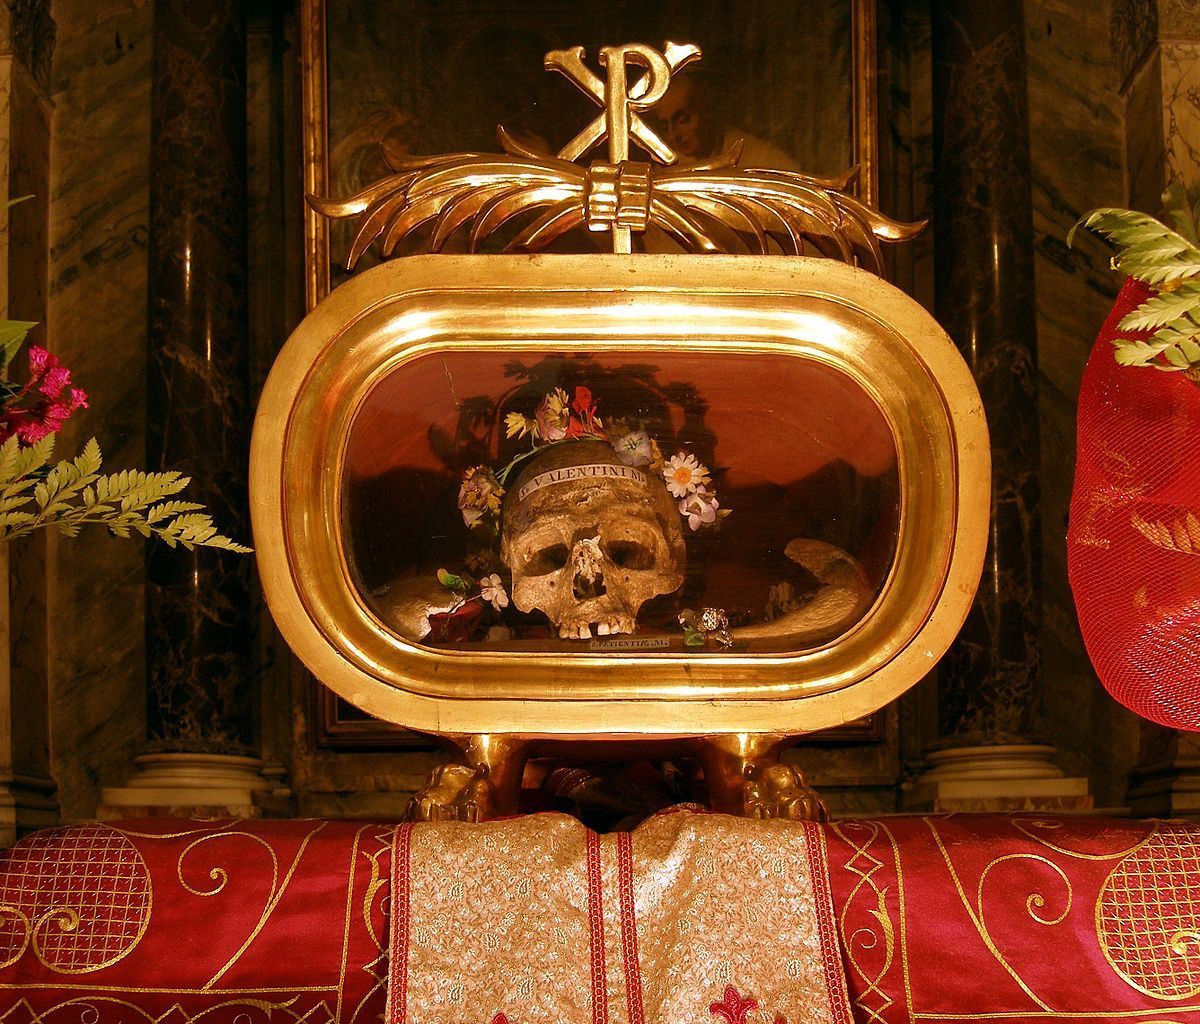 Churches from Poland to Missouri claim to possess some of Saint Valentine's remains. This, from the Basilica di Santa Maria in Rome, is supposed to be his skull.